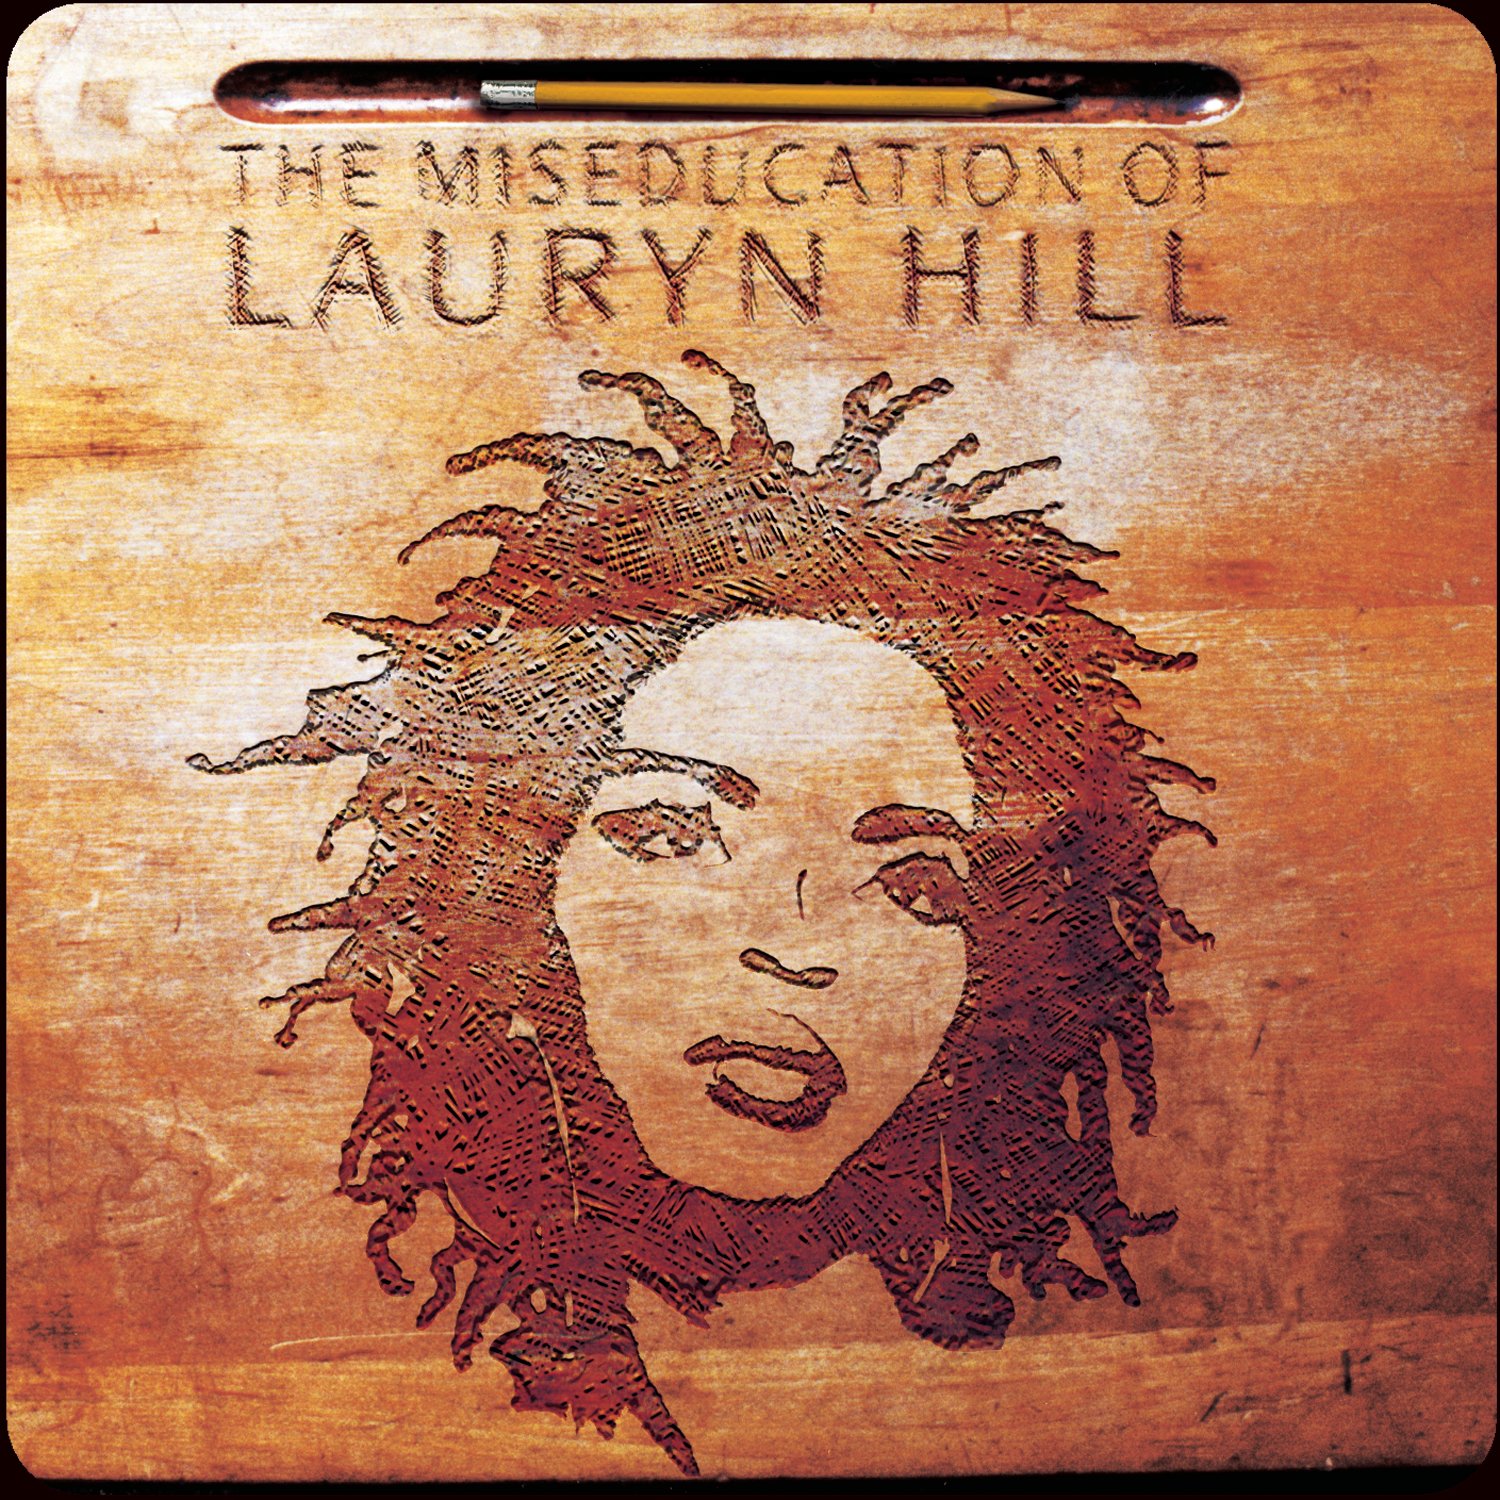 Album cover for The Miseducation of Lauryn Hill